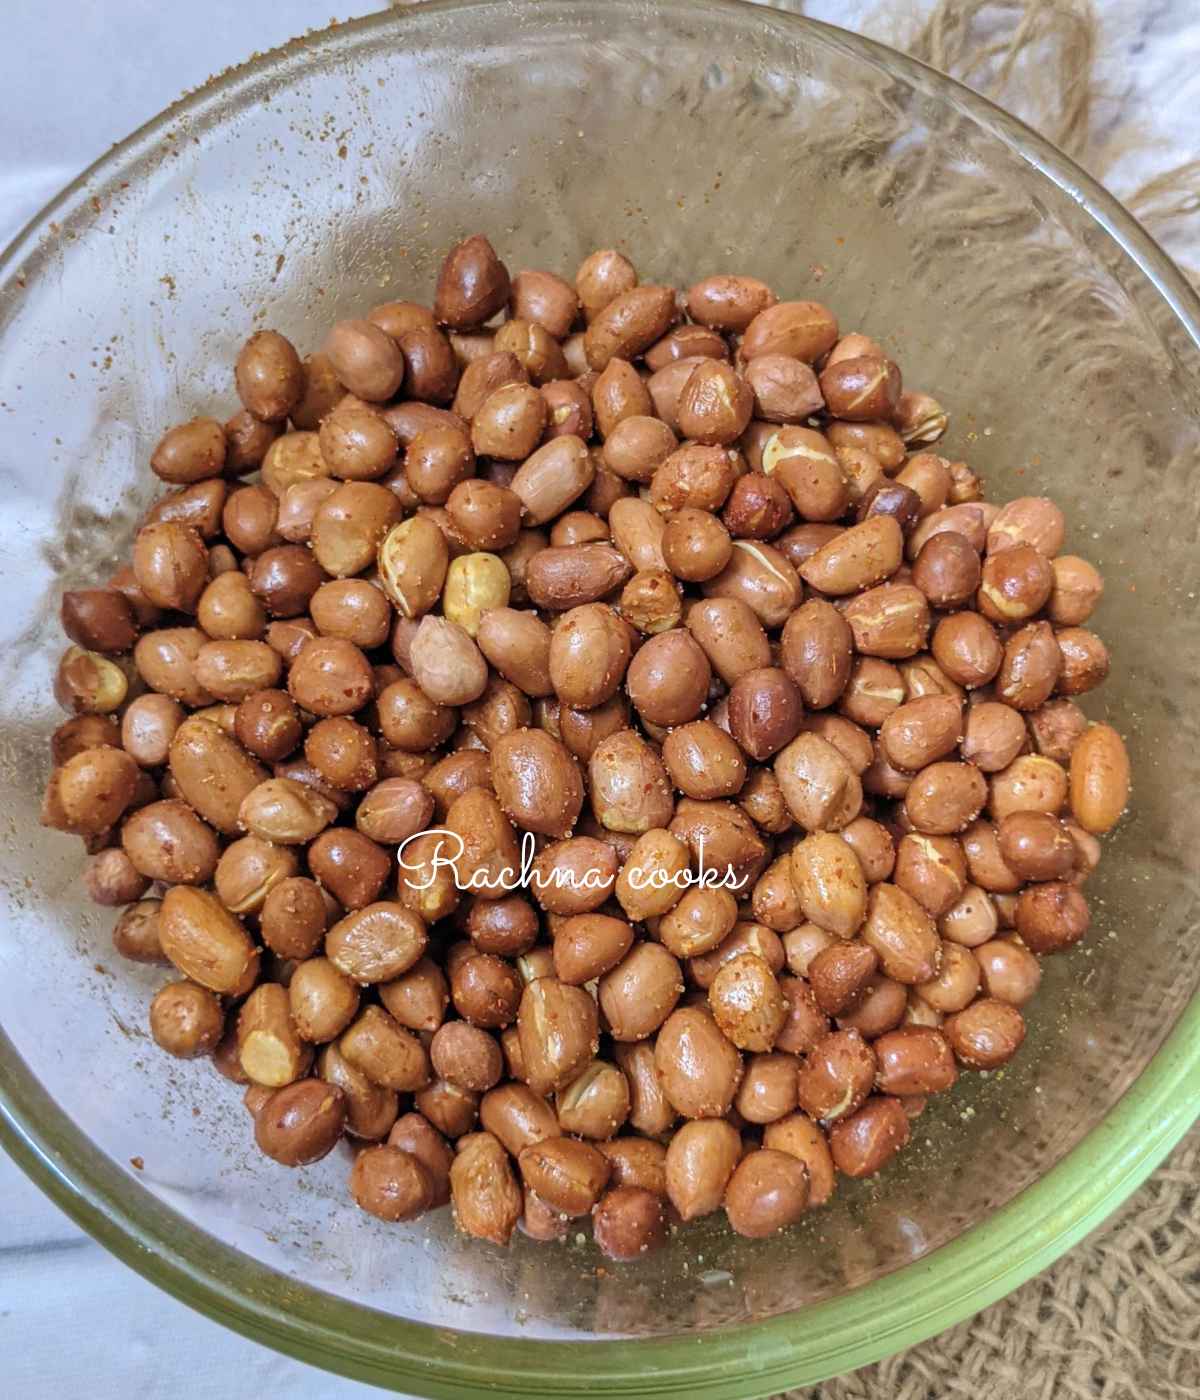 Peanuts after adding spices to them.